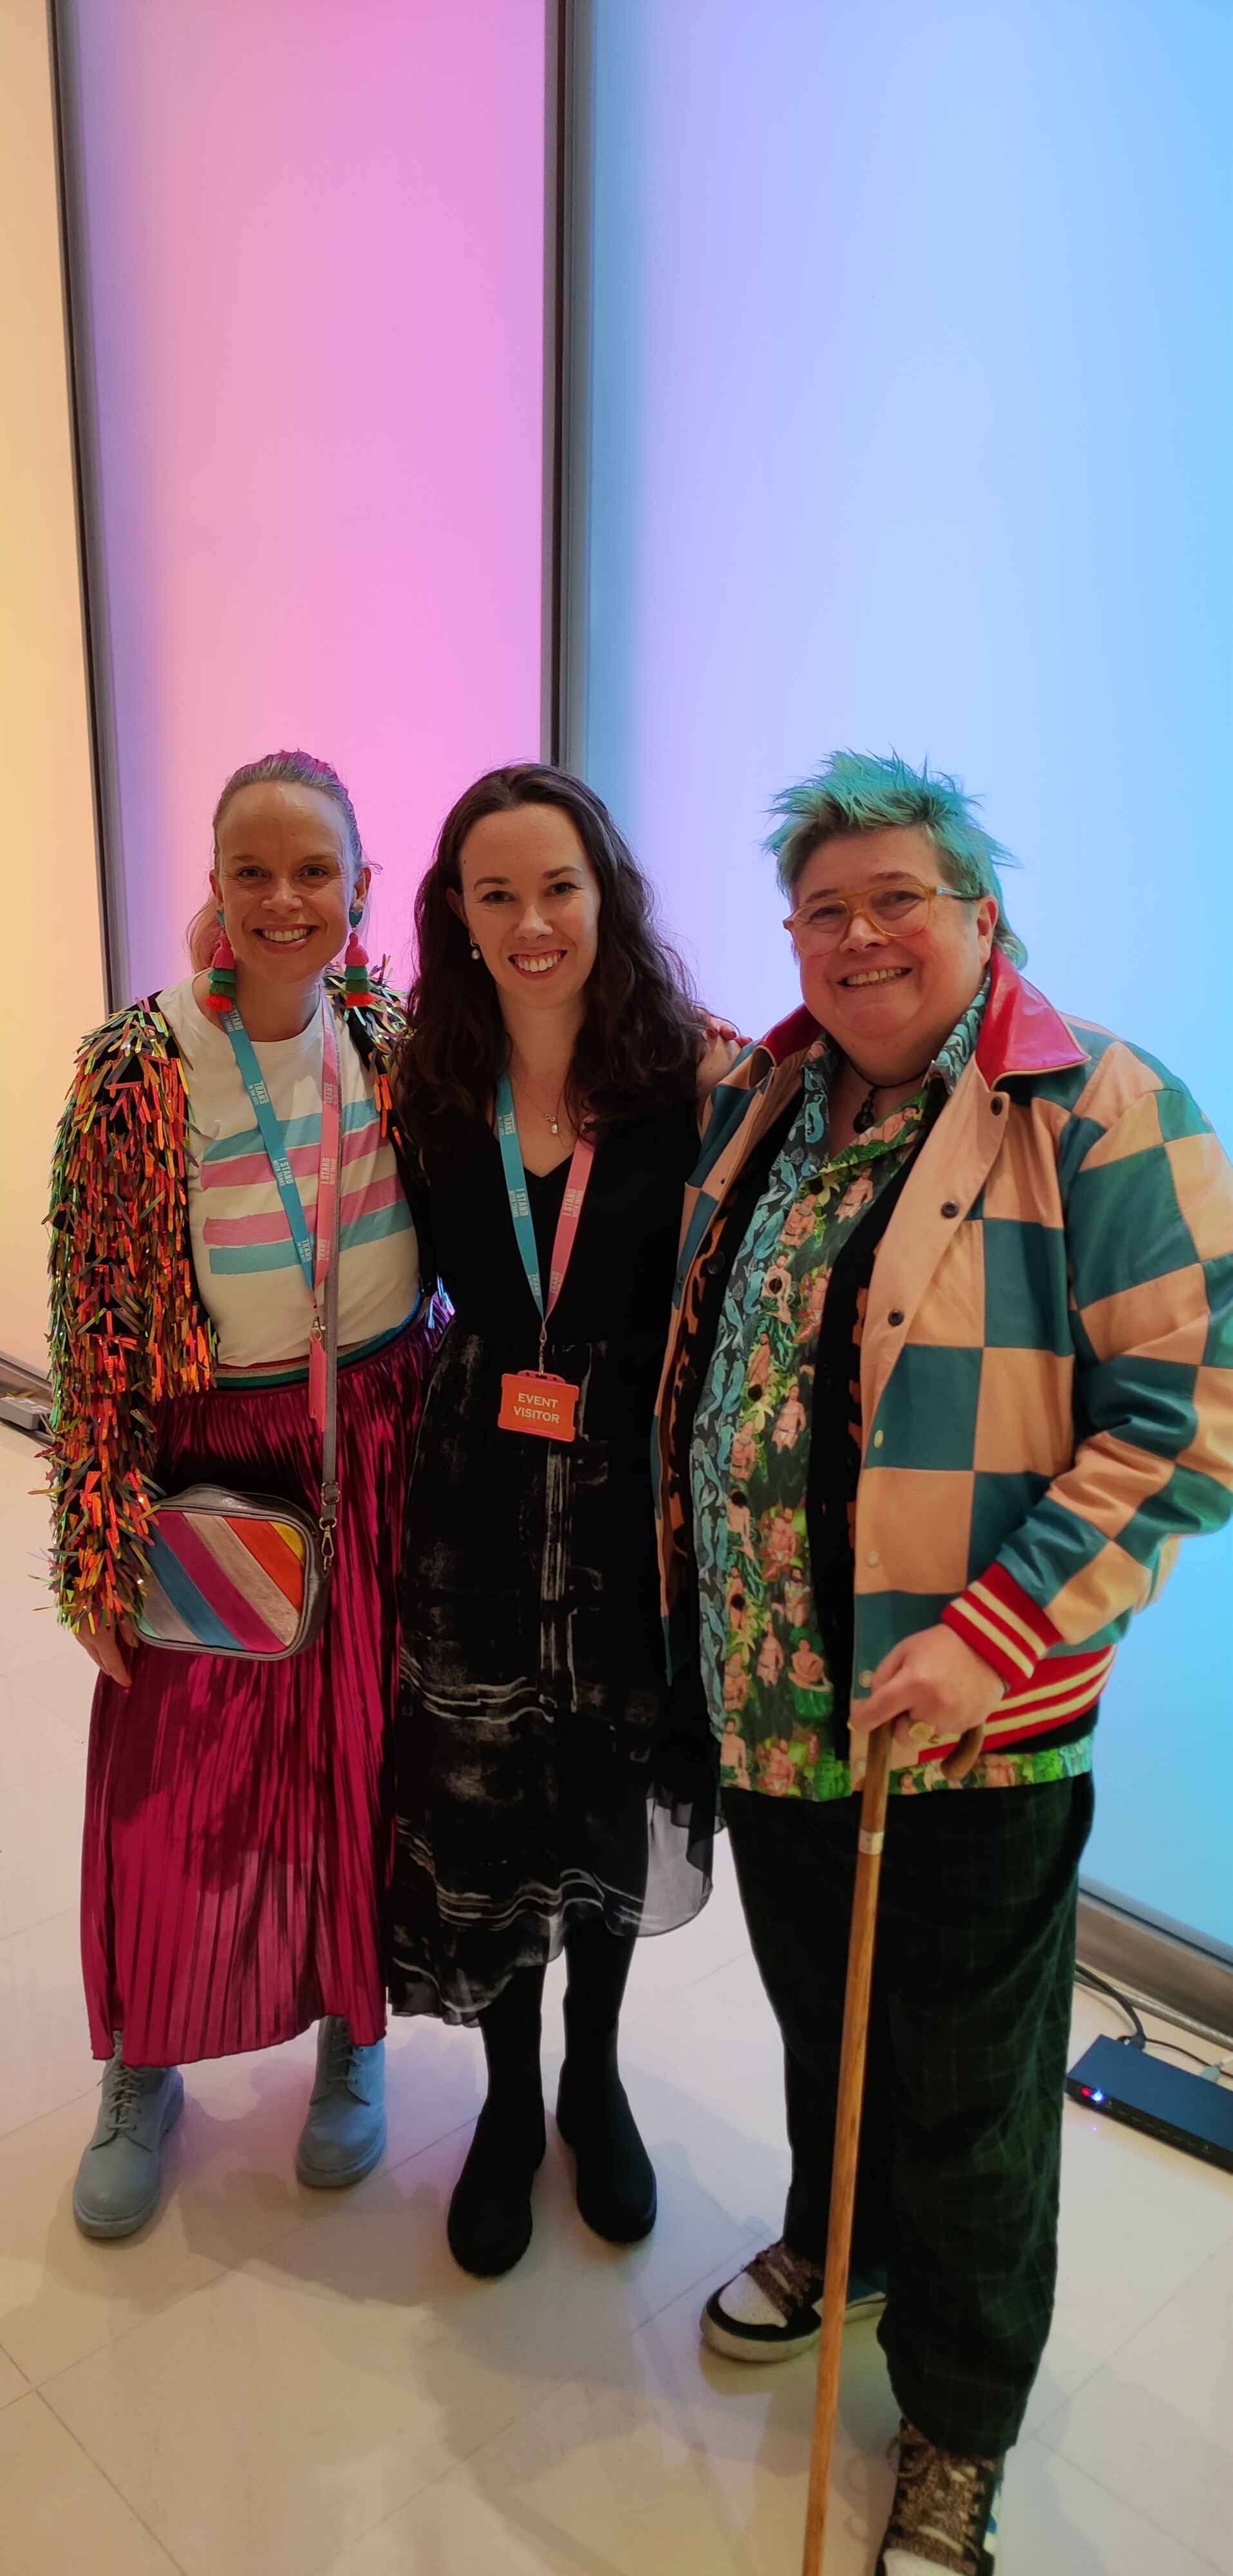 Thoughtworks Amy Lynch (she/her), Emily Bollands (she/her) and Dr J Harrison (they/them) attending the Trans in the City Awards as Thoughtworks was shortlisted for the Trans Inclusive Organization Award